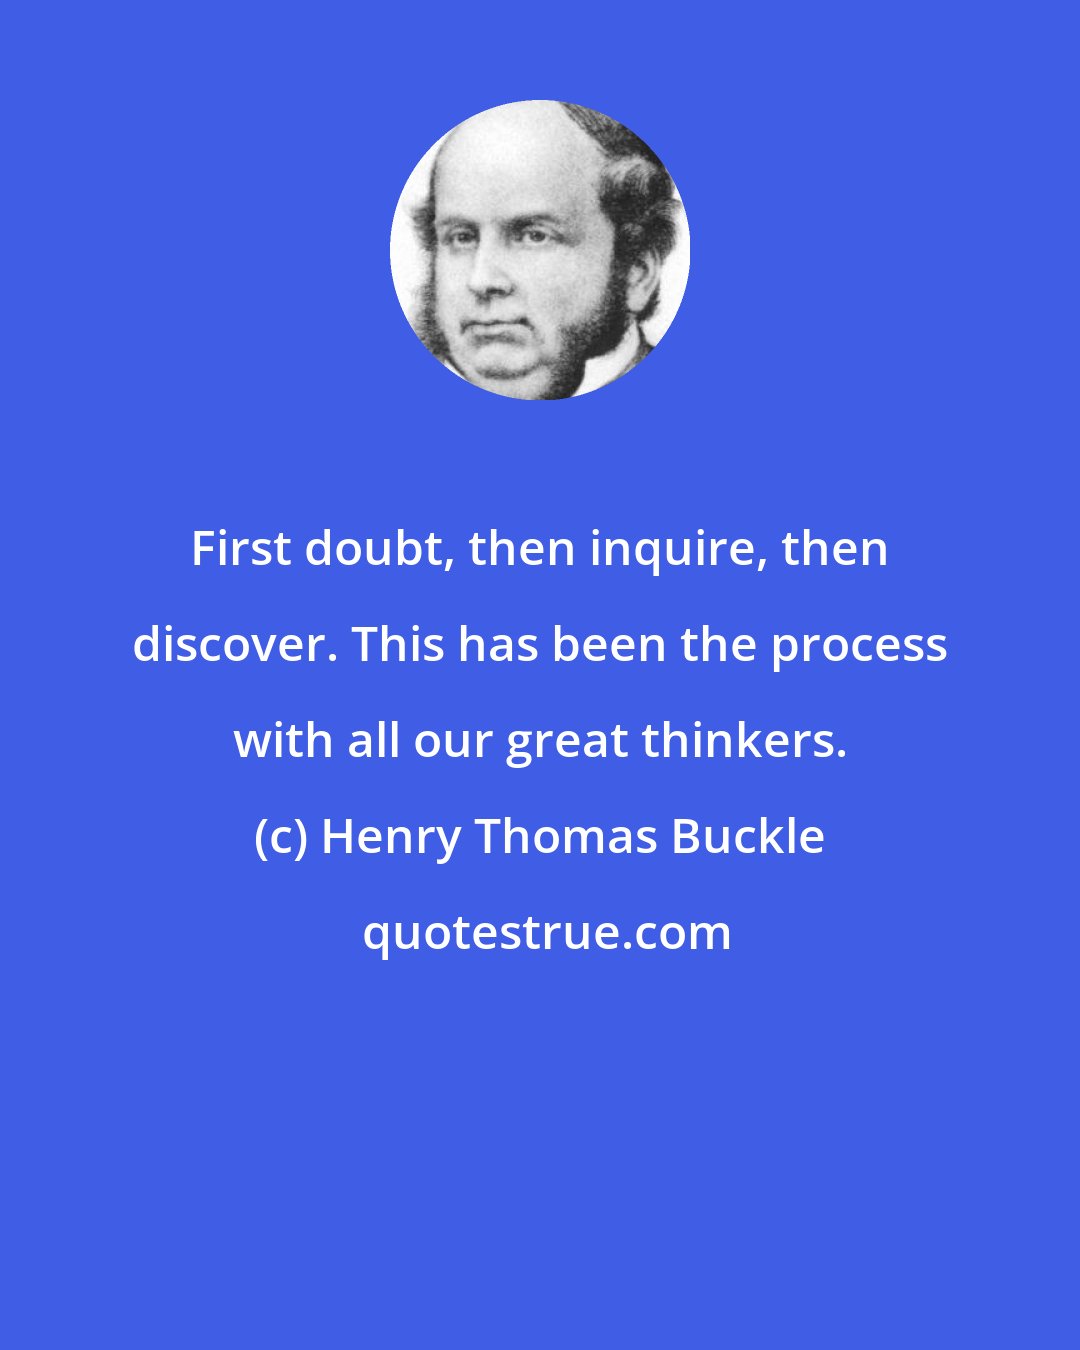 Henry Thomas Buckle: First doubt, then inquire, then discover. This has been the process with all our great thinkers.